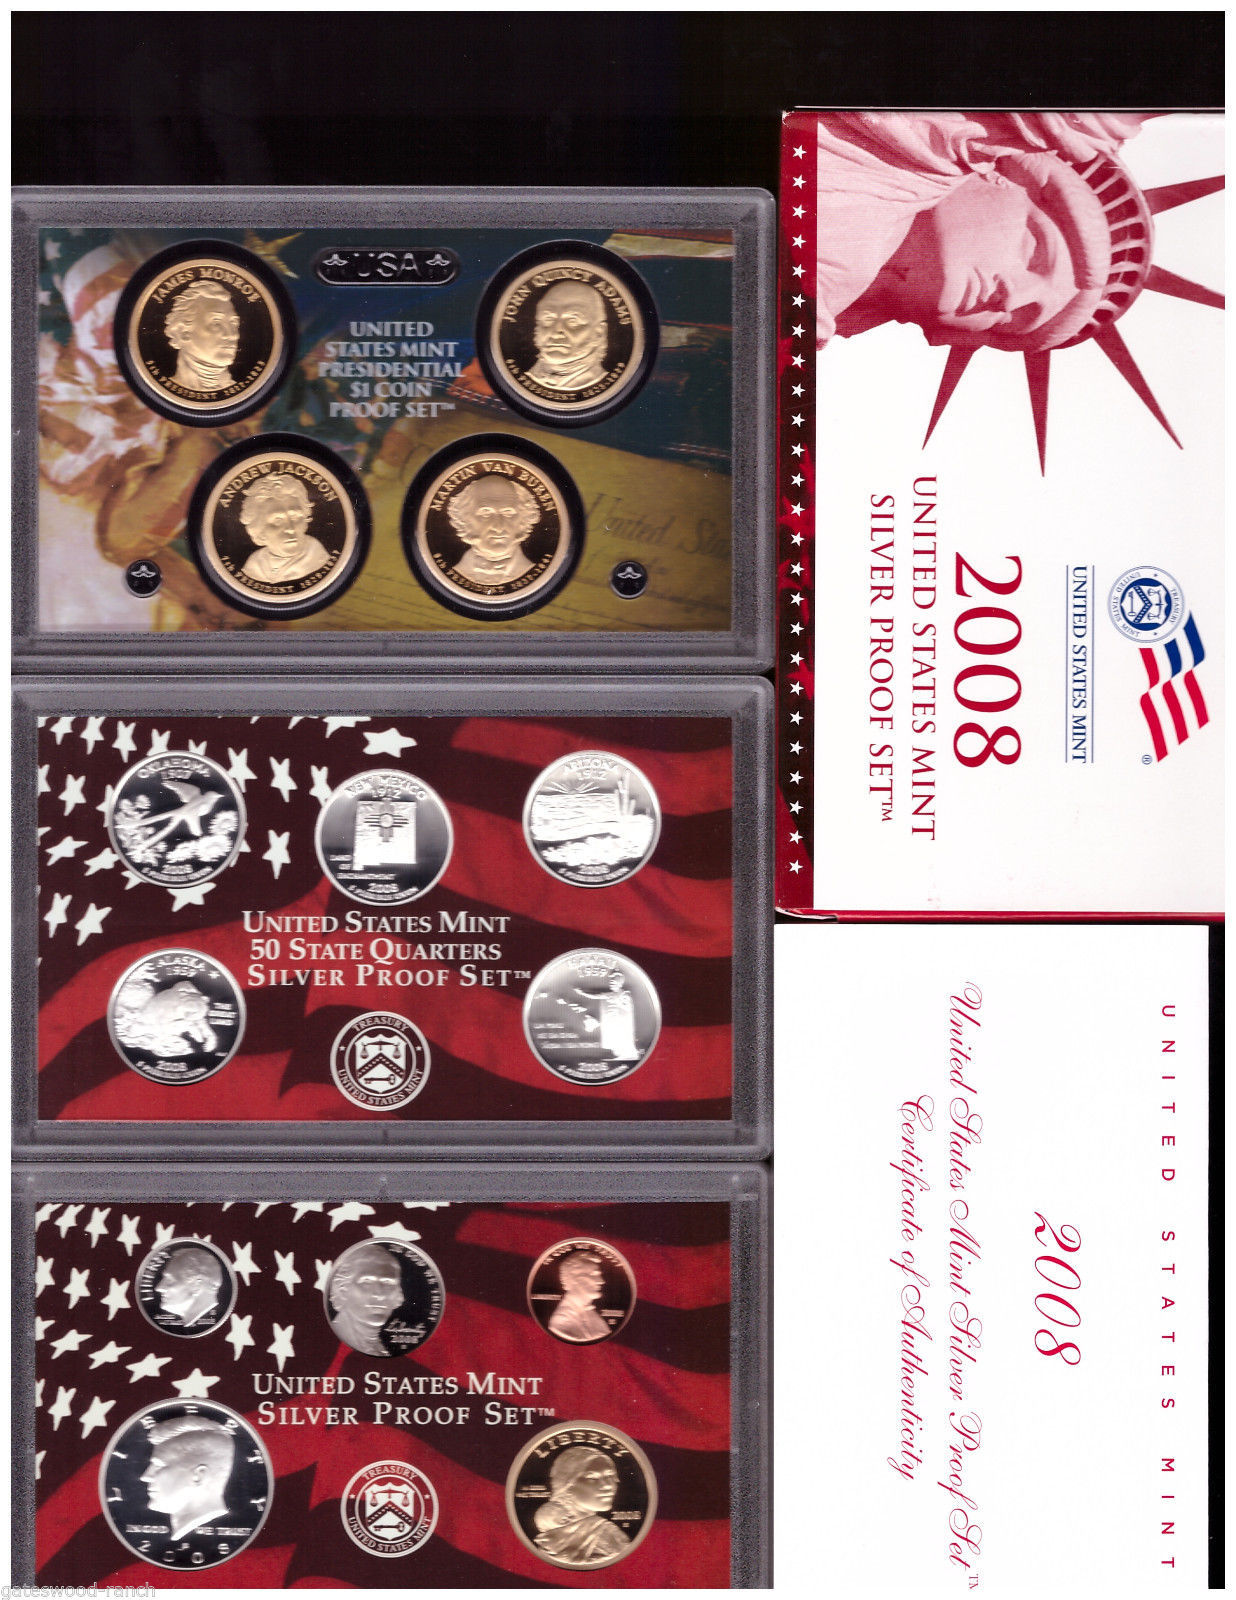 Primary image for 2008 SILVER PROOF SET  - Complete With Box, COA's and Presidential Dollars